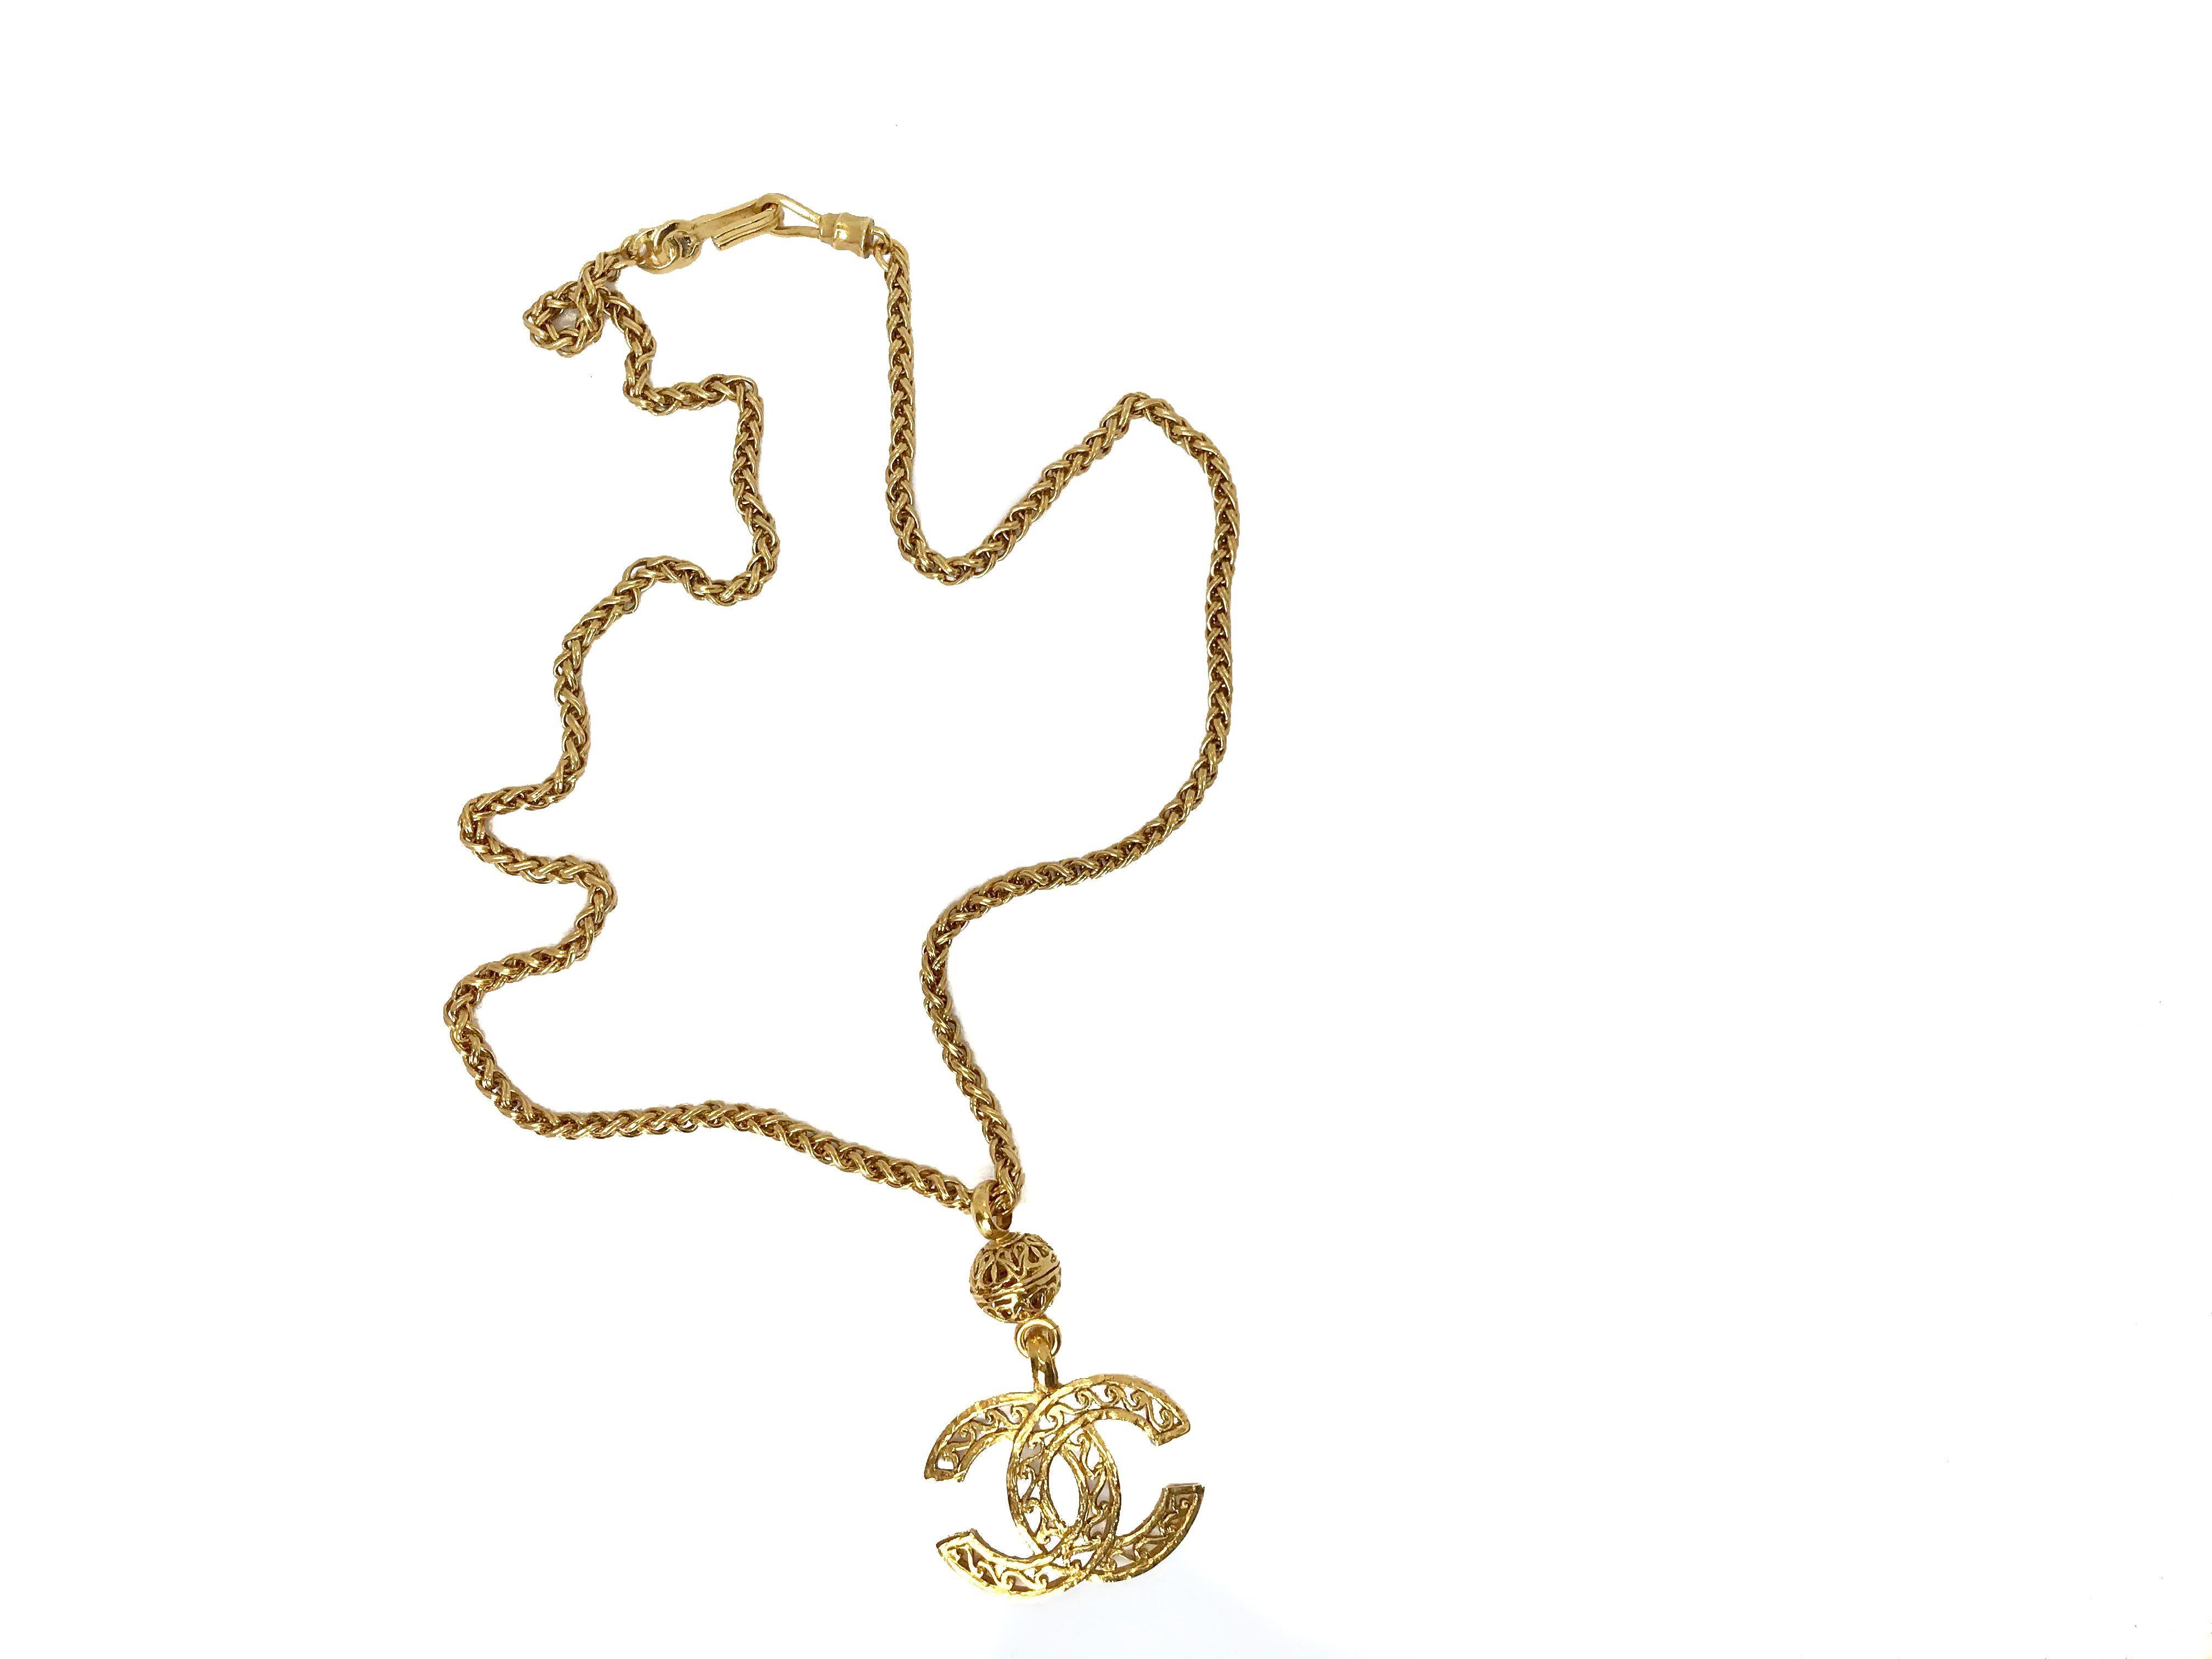 Chanel 90s Vintage CC Gold Plated Pendant Necklace on Chunky Chain.  From the 1995 Autumn Winter collection.

The chain is chunky and weighty, featuring a large open work CC logo suspended from a fabulous sphere.  A real head turning piece for the